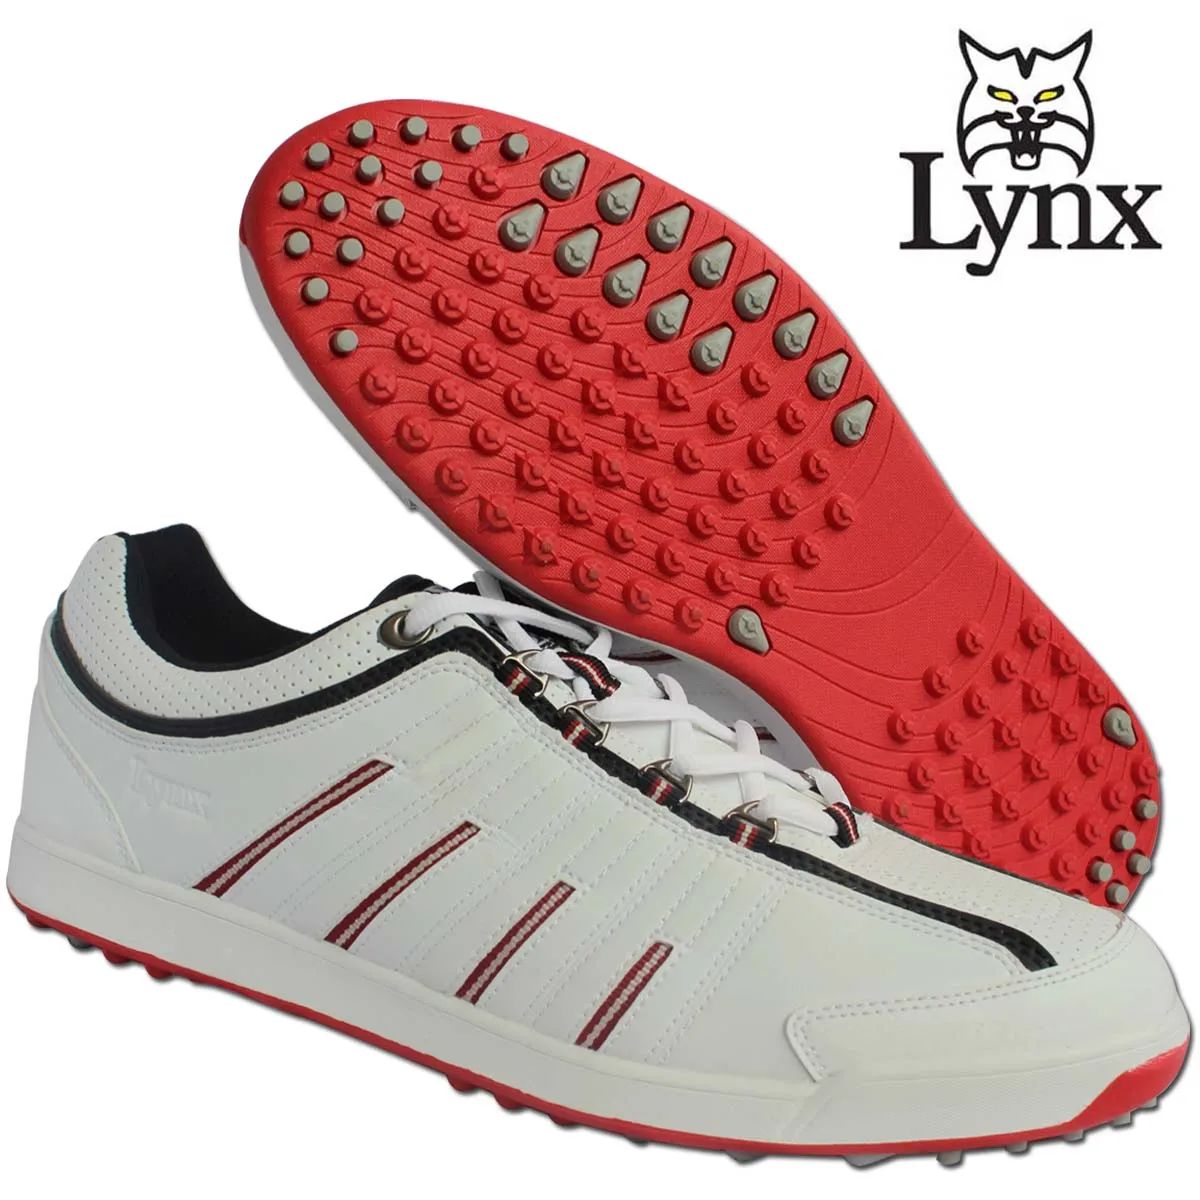 Cheap Golf Shoes 10 5, find Golf Shoes 